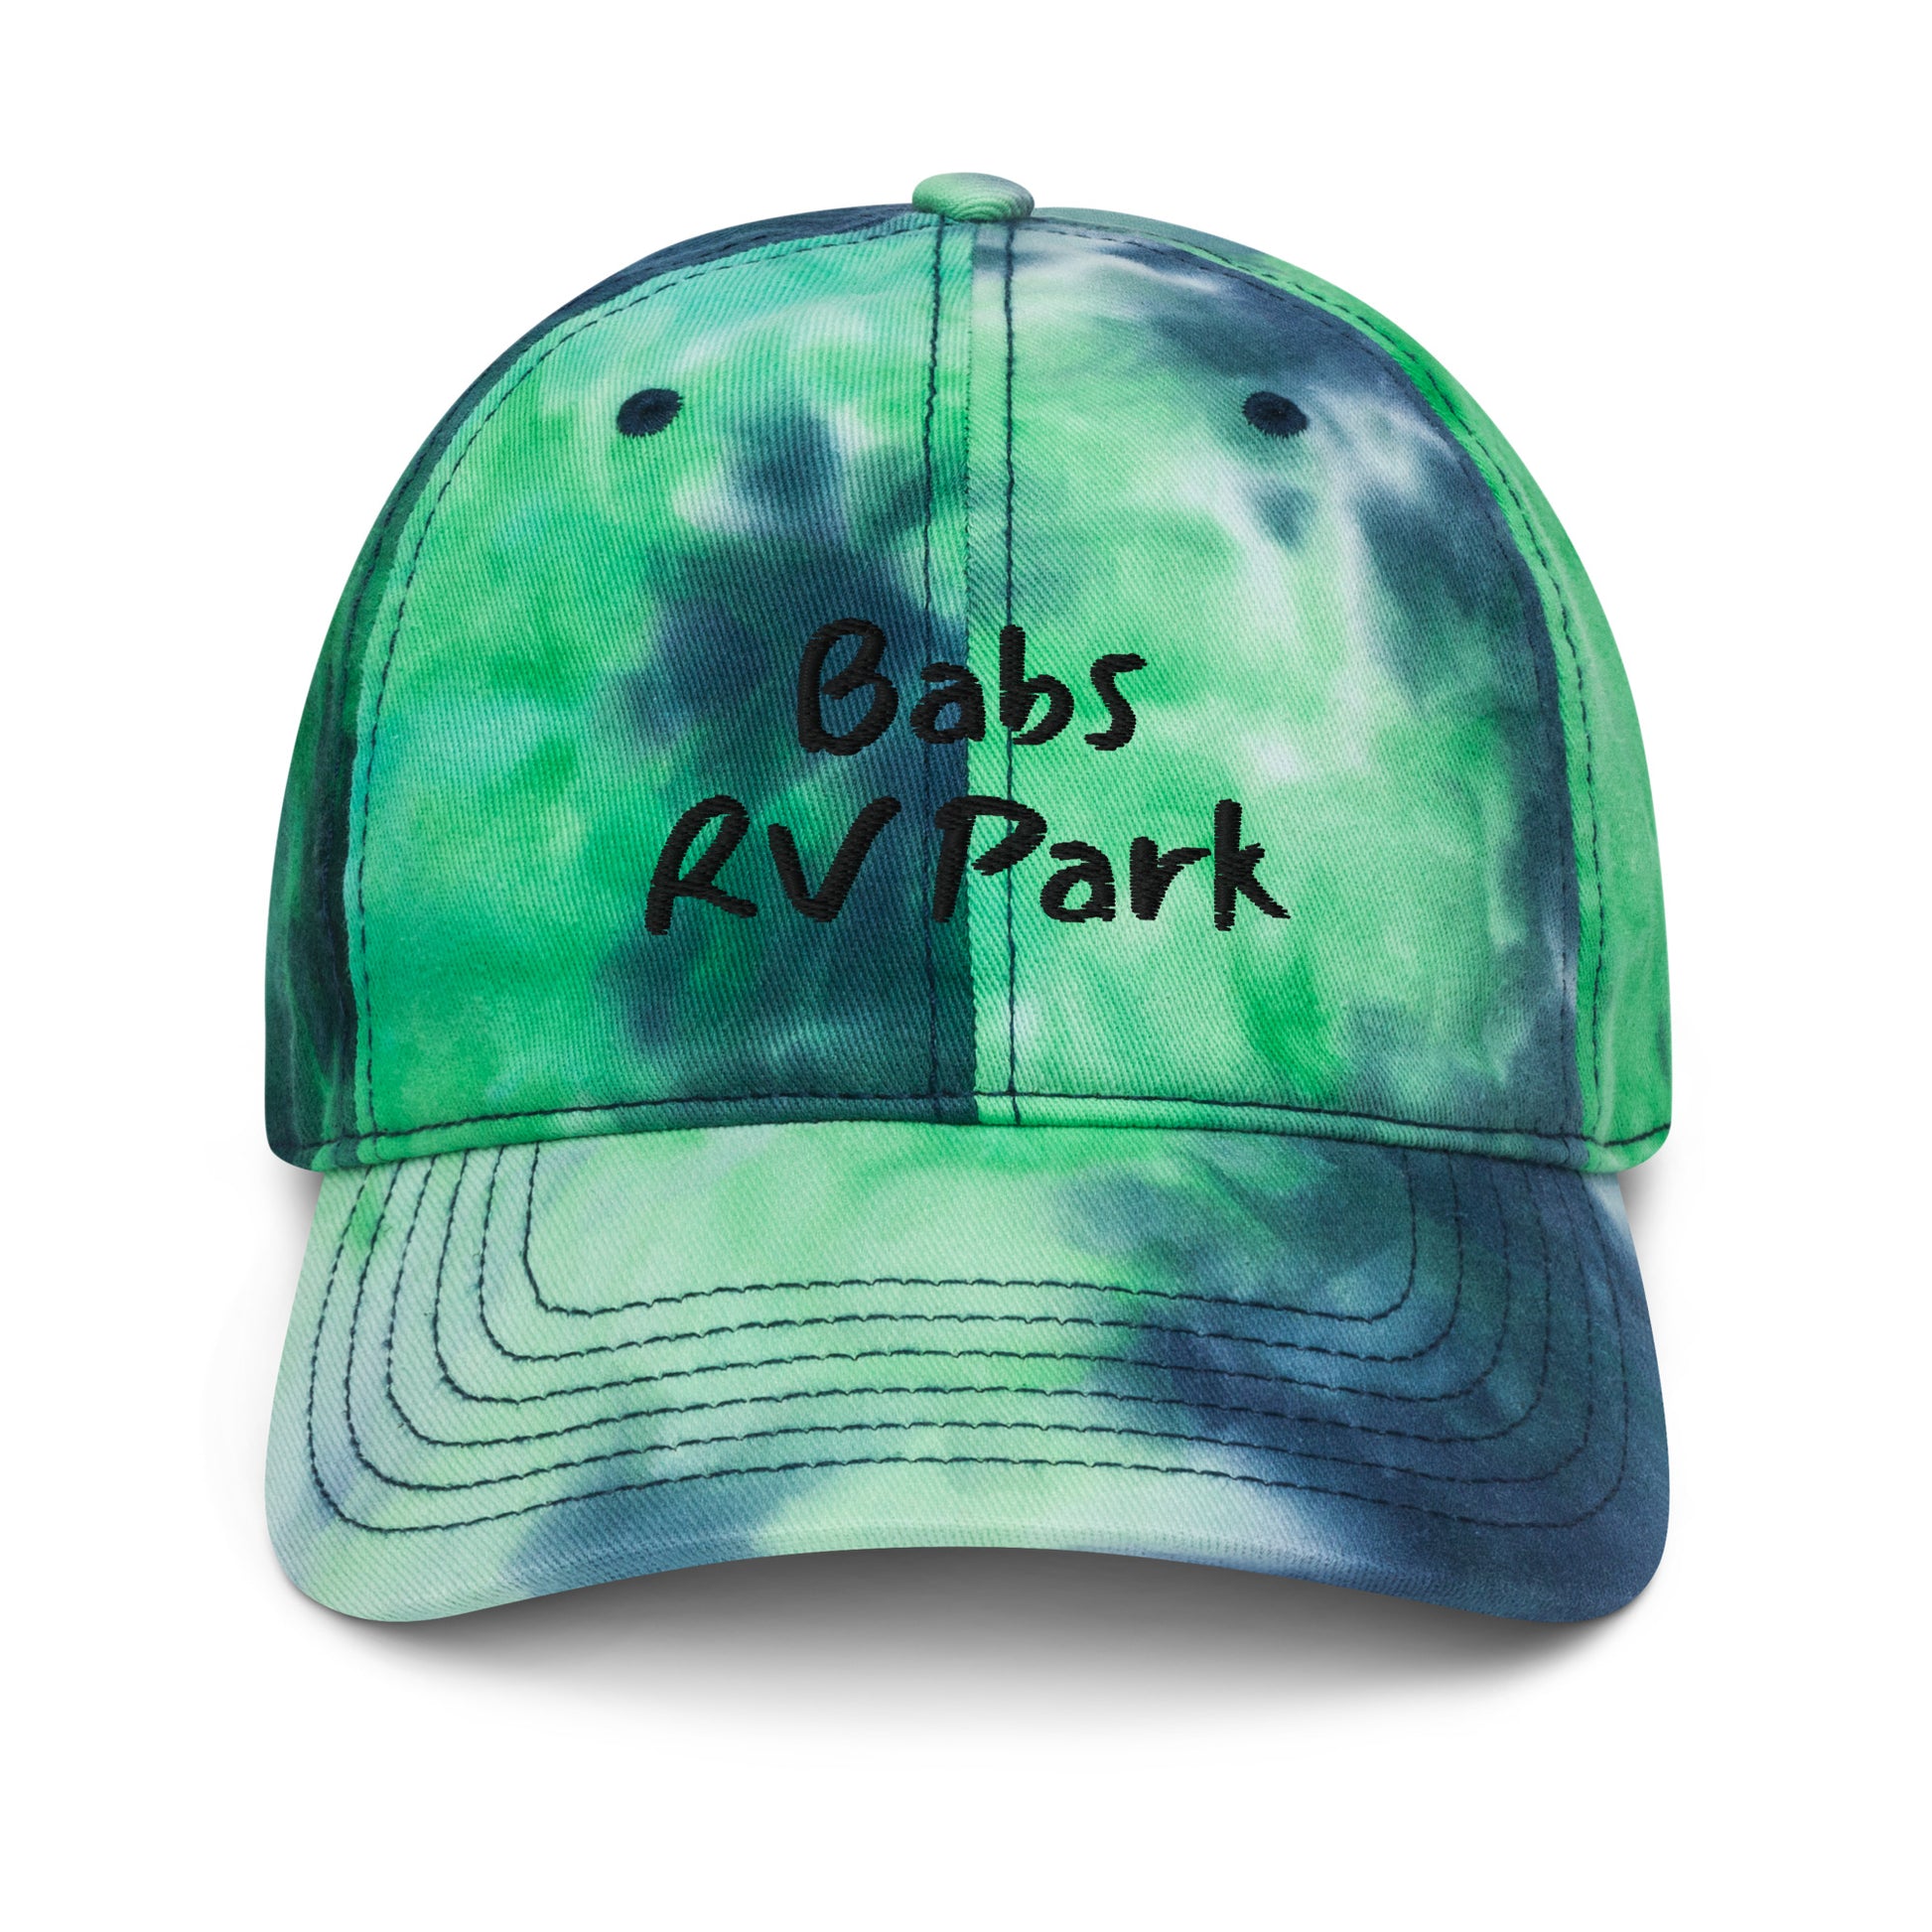 Babs RV Park Tie dye hat - Ghostly Tails